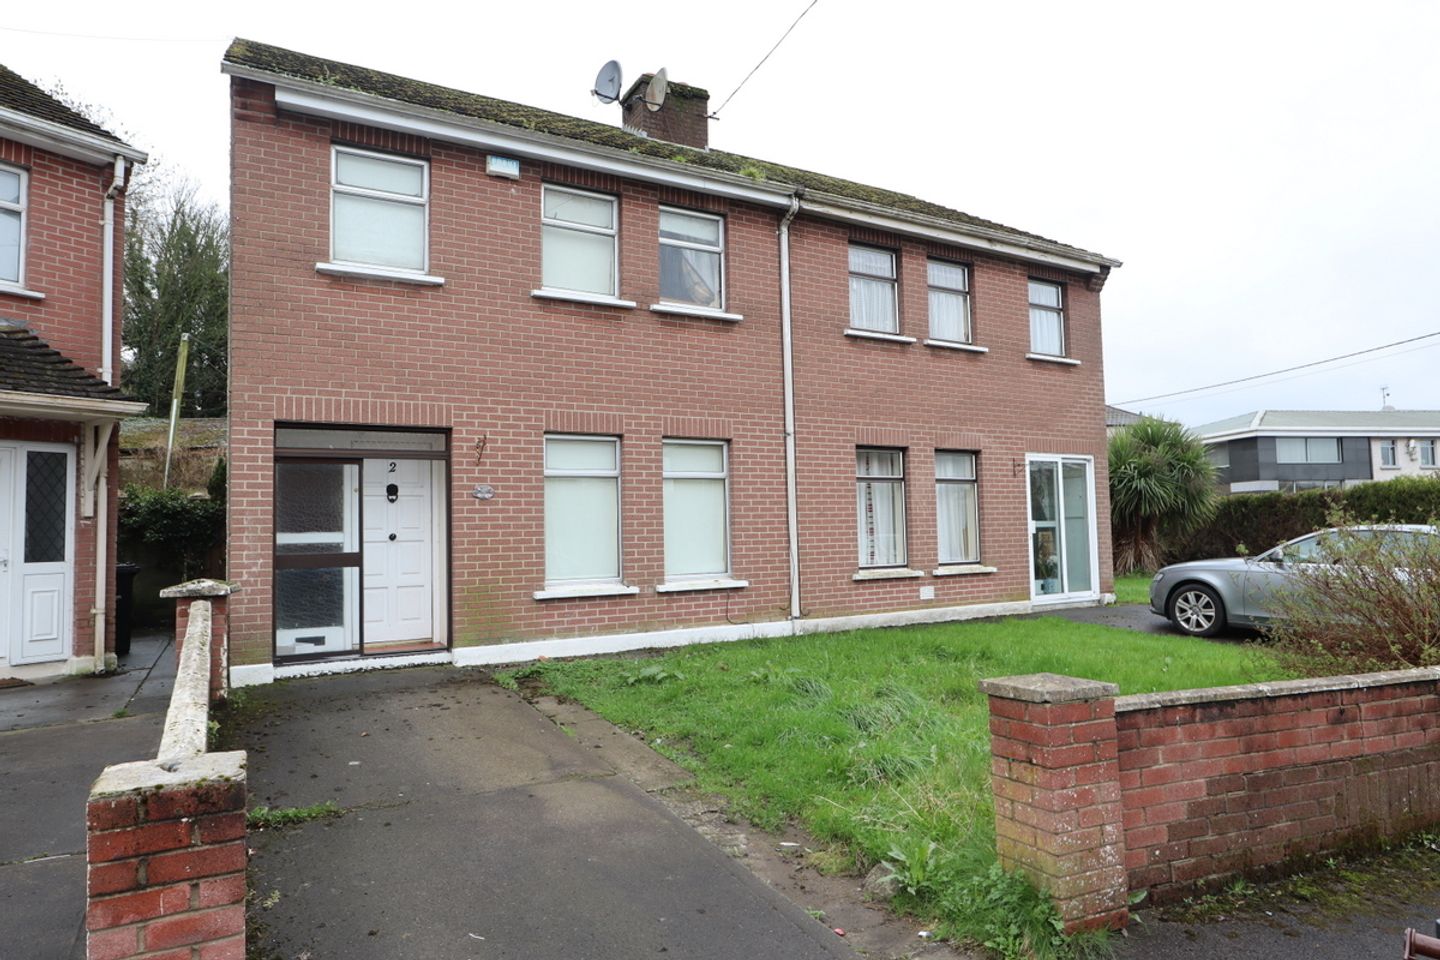 2 Riverside Crescent, Marsh Road, Drogheda, Co. Louth, A92AWK4